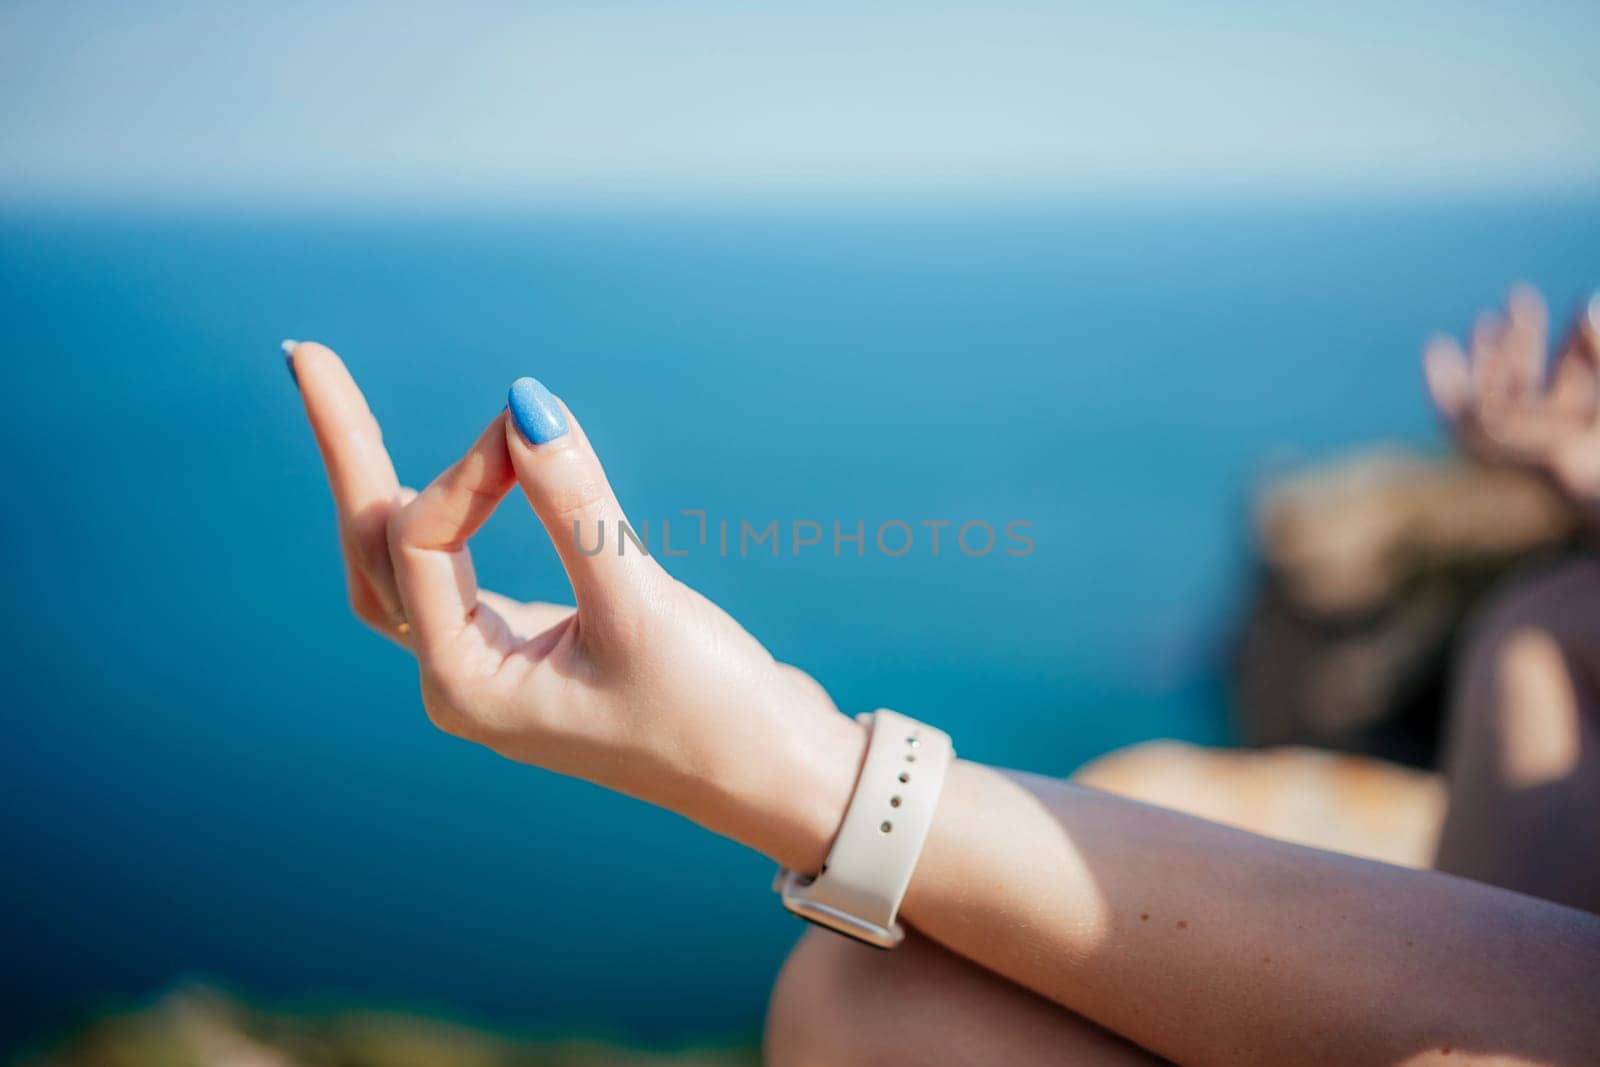 A woman is sitting on a rock by the ocean, with her hand in a prayer position. She is wearing a white watch and has blue nail polish on her nails. Concept of relaxation and mindfulness